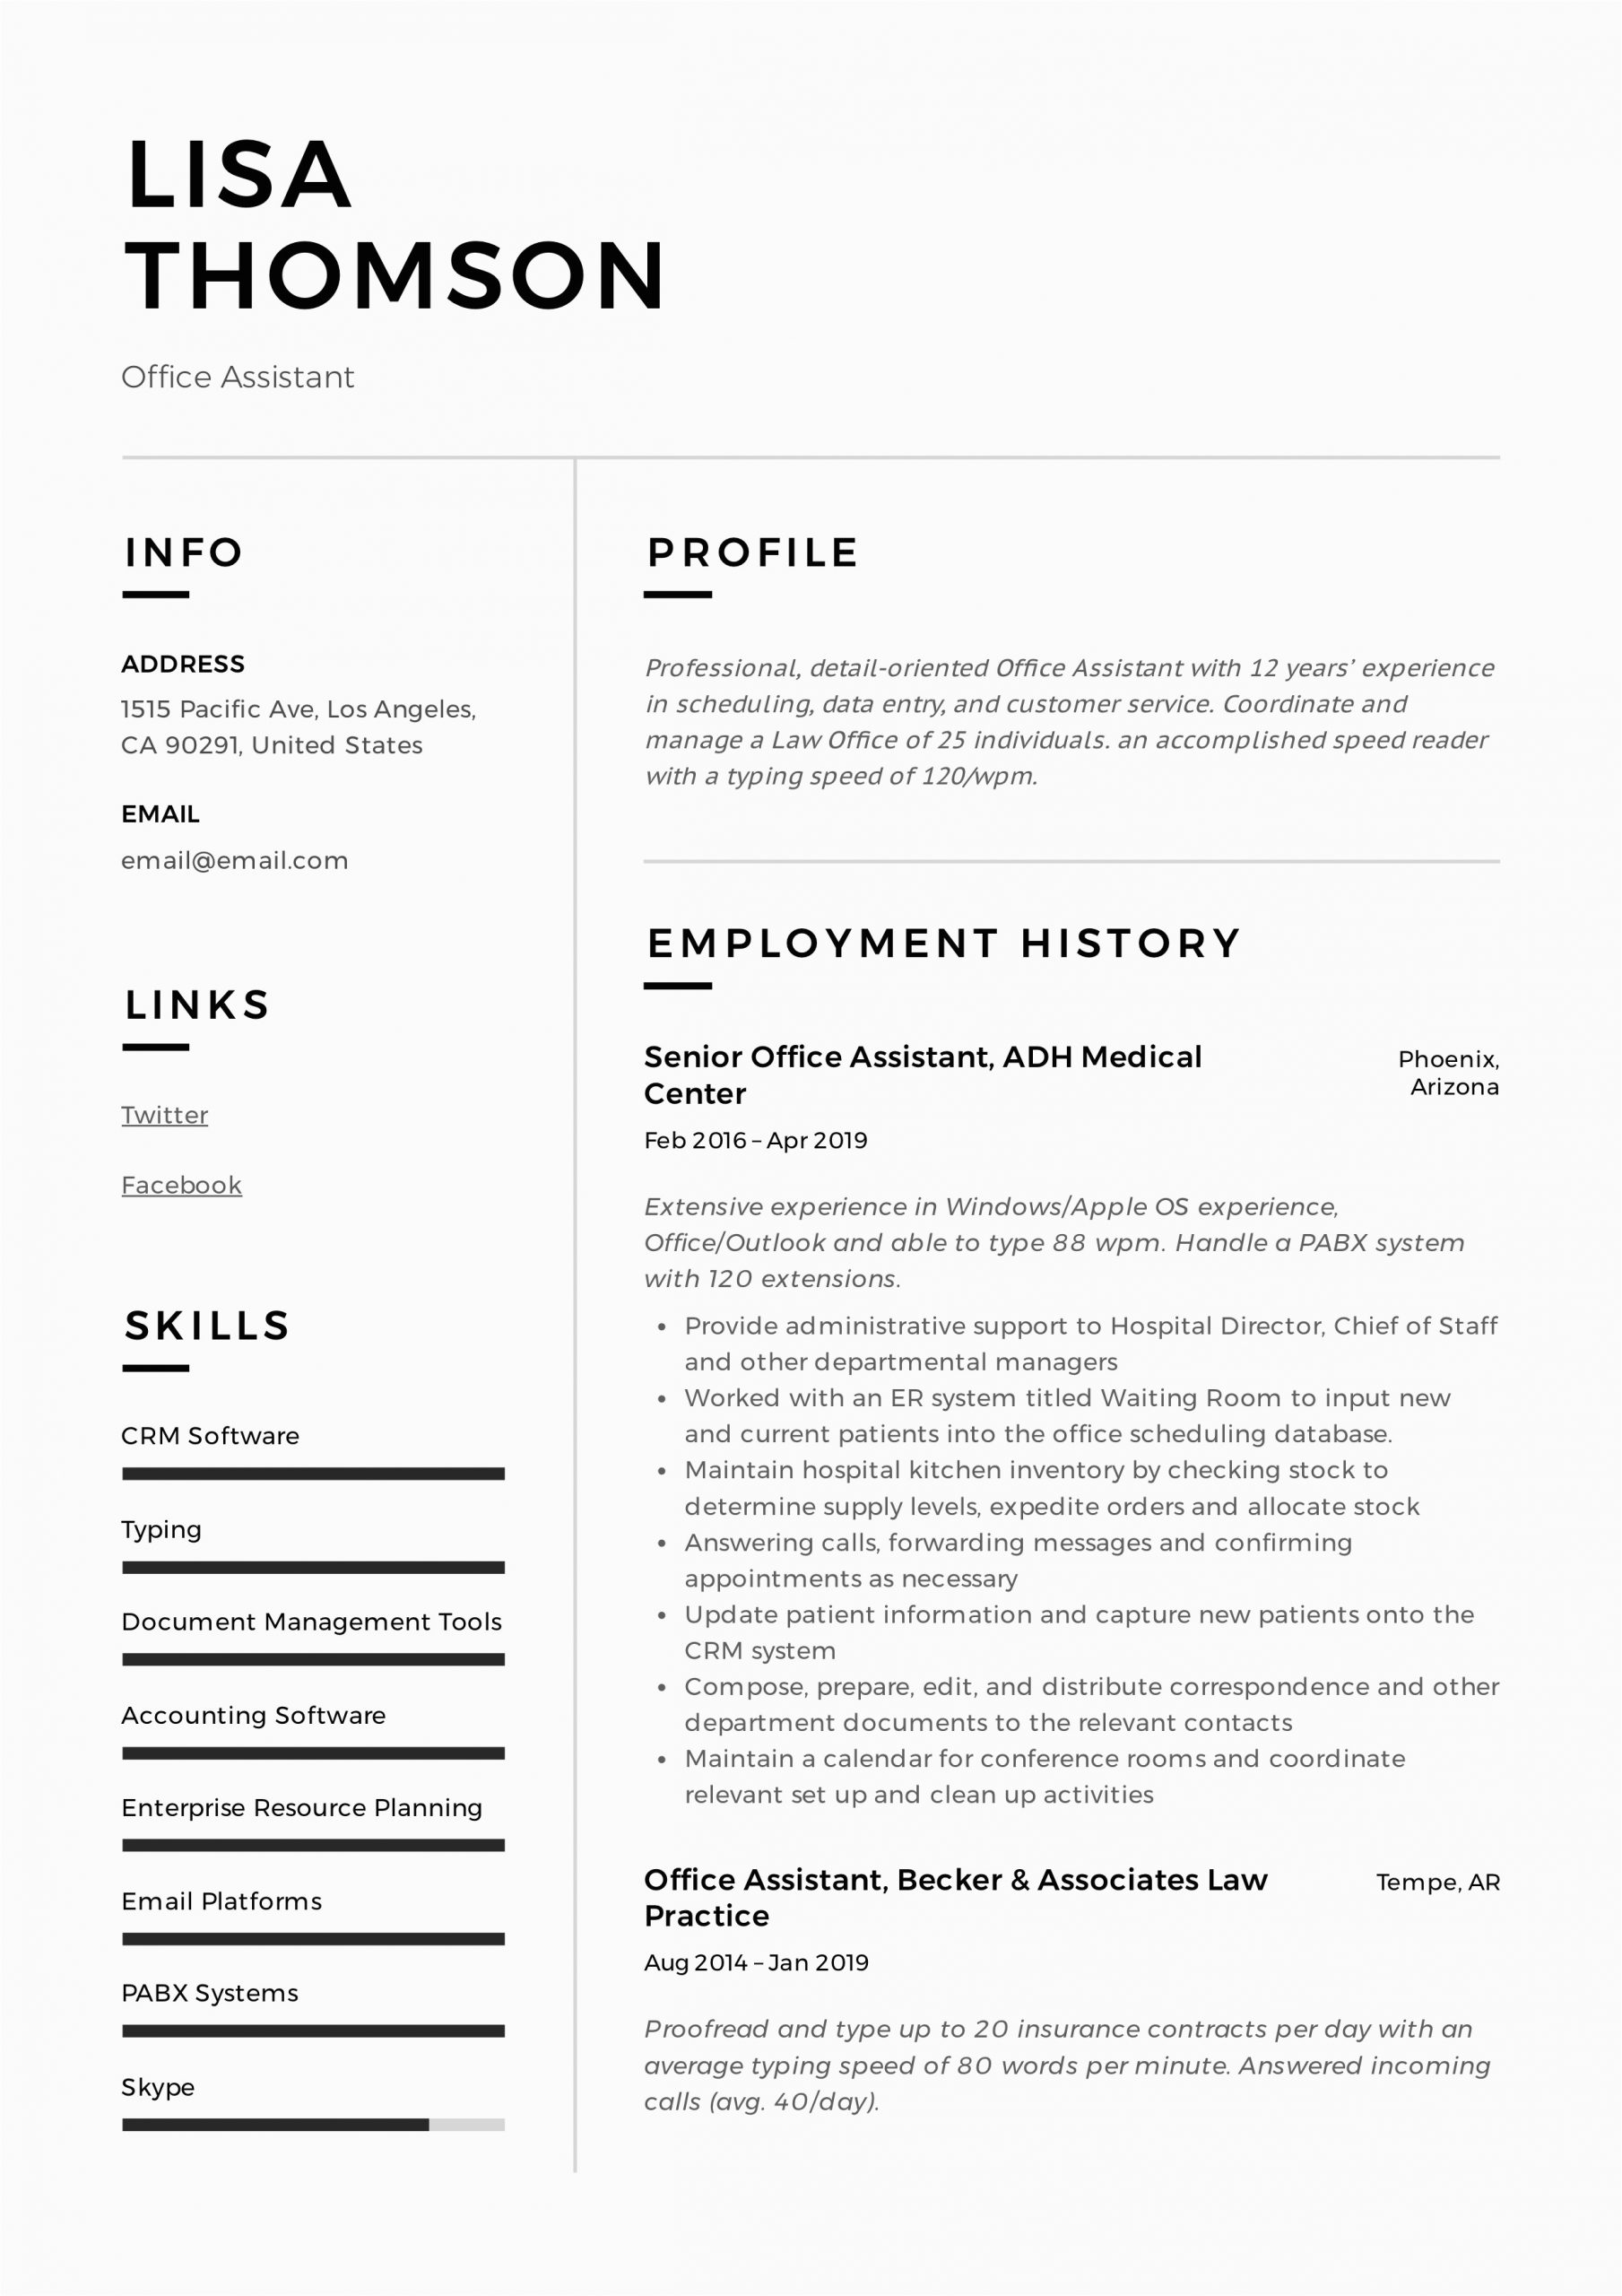 Sample Resume for Office assistant Examples Fice assistant Resume Writing Guide